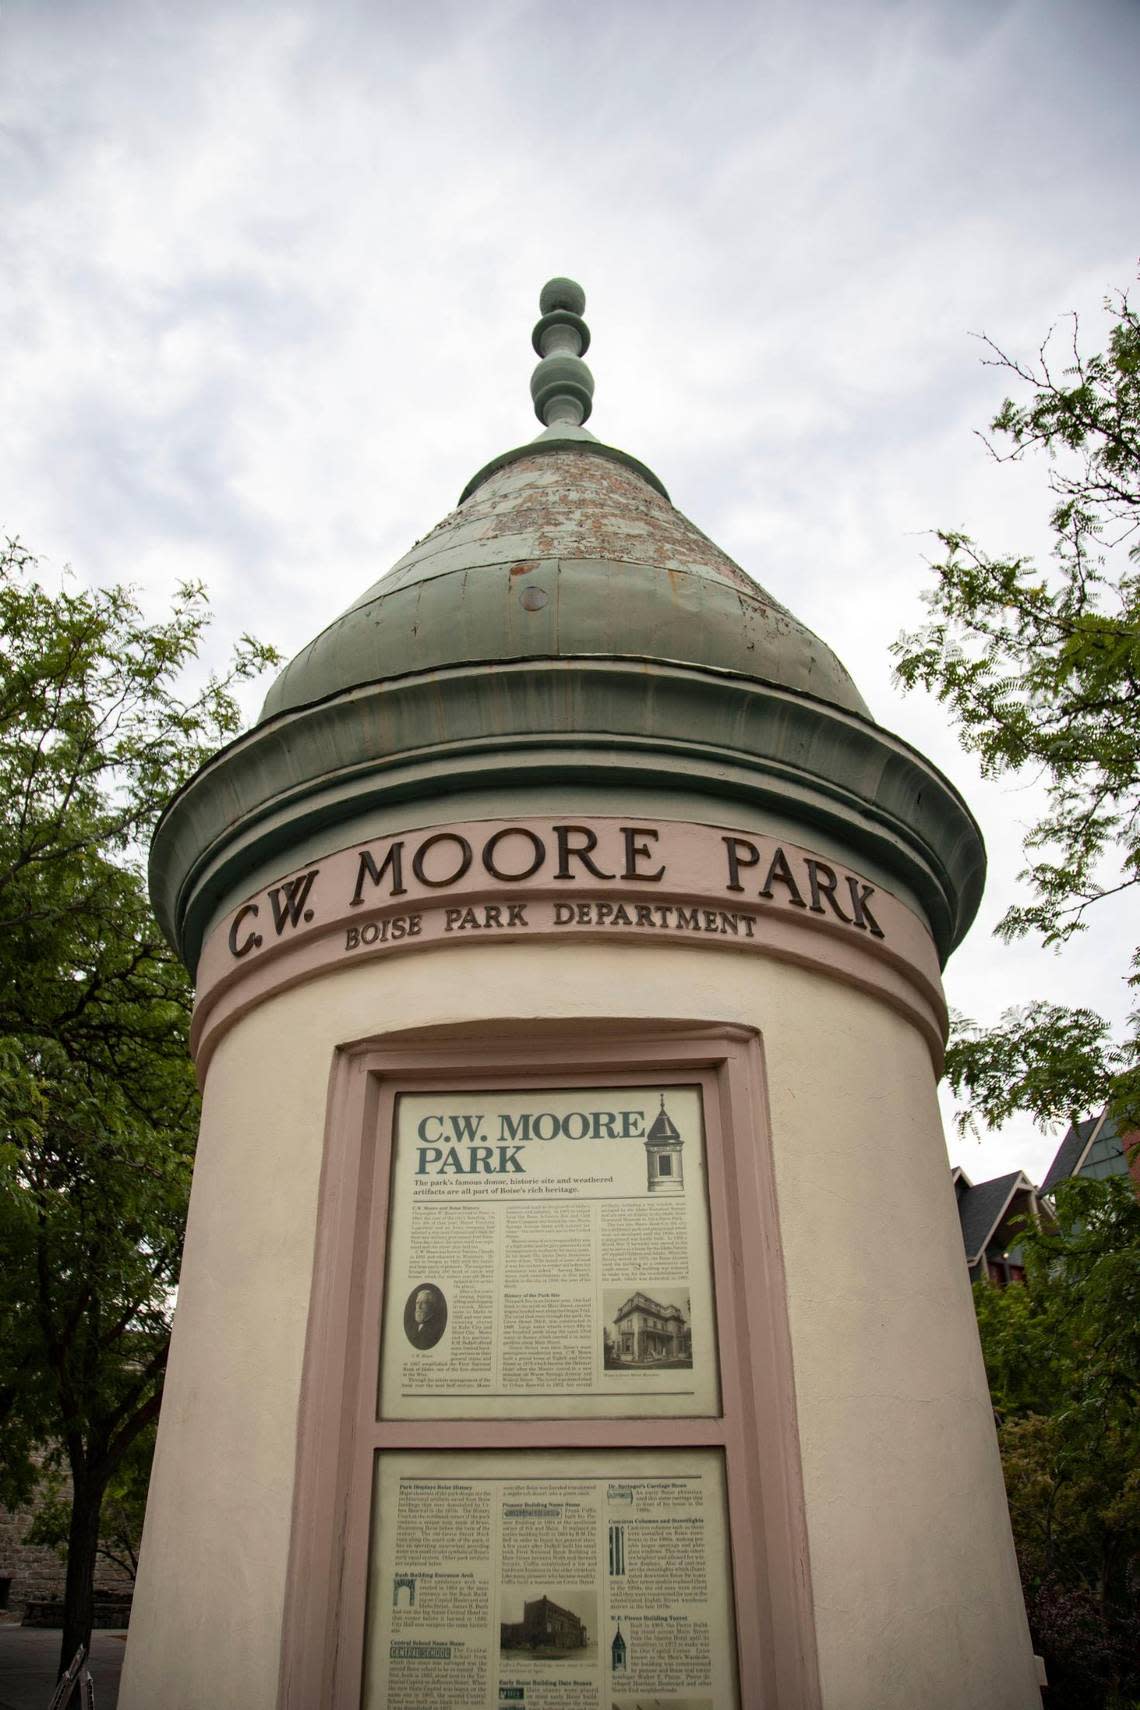 Downtown Boise’s C.W. Moore Park displays artifacts from buildings demolished during the urban renewal era, including a turret from the W.E. Pierce Building, demolished in 1975.